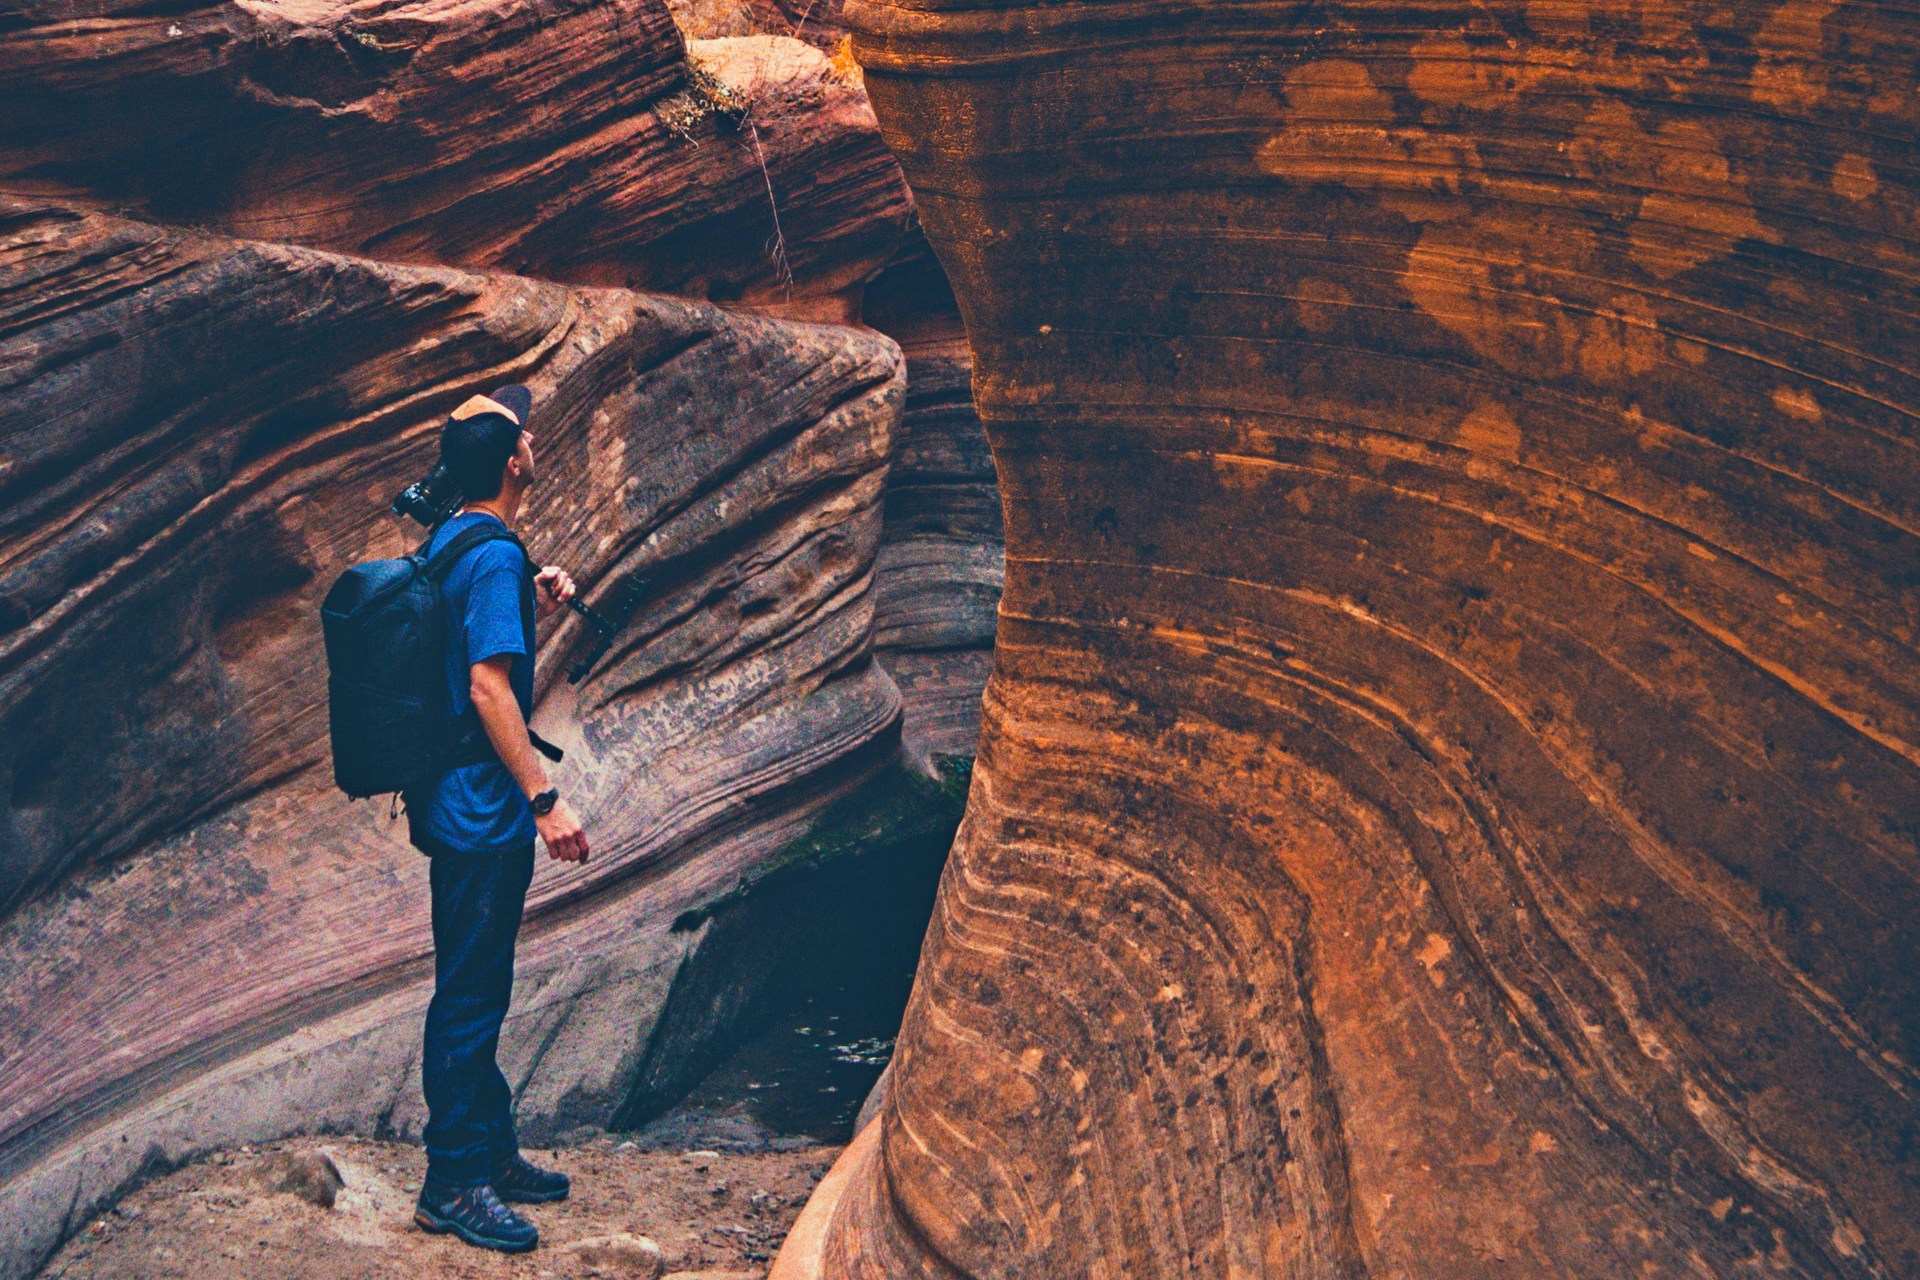 raqabat; umm ejel; hike; wadi rum; group; individual; via jordan travel & tours; company; jordan; desert; adventure; tour; experience; travel; explore; destination; nature; landscape; guided hike; jordanian hike; outdoor; excursion; rocks; cliffs; canyons; wilderness; sand dunes; camel trekking; bedouin camp; middle east; arabian desert; red sand; rugged terrain; rocky mountains; breathtaking views; geological formations; ancient sites; cultural experience; authentic jordanian experience; off the beaten path; local guide; sunset hike; sunrise hike; off-road; jeep safari; camping; stargazing; photography; historical; archaeological sites; petra; dead sea; aqaba; discovery; hidden gems; unique experience; travelers; adventure seekers; eco-tourism; sustainable tourism; responsible travel; jordanian culture; local cuisine; hospitality; nomadic lifestyle; thrill; excitement; challenge; physical activity; memorable experience; outdoor enthusiasts; hikers; trekkers; backpackers; rocky landscapes; natural beauty; solo travelers; small group tours; tailor-made tours; private tours; custom itinerary; safety; expert guides; travel packages; cultural immersion; adrenaline rush; hidden wonders; visit jordan; explore jordan; travel to wadi rum; visit wadi rum.